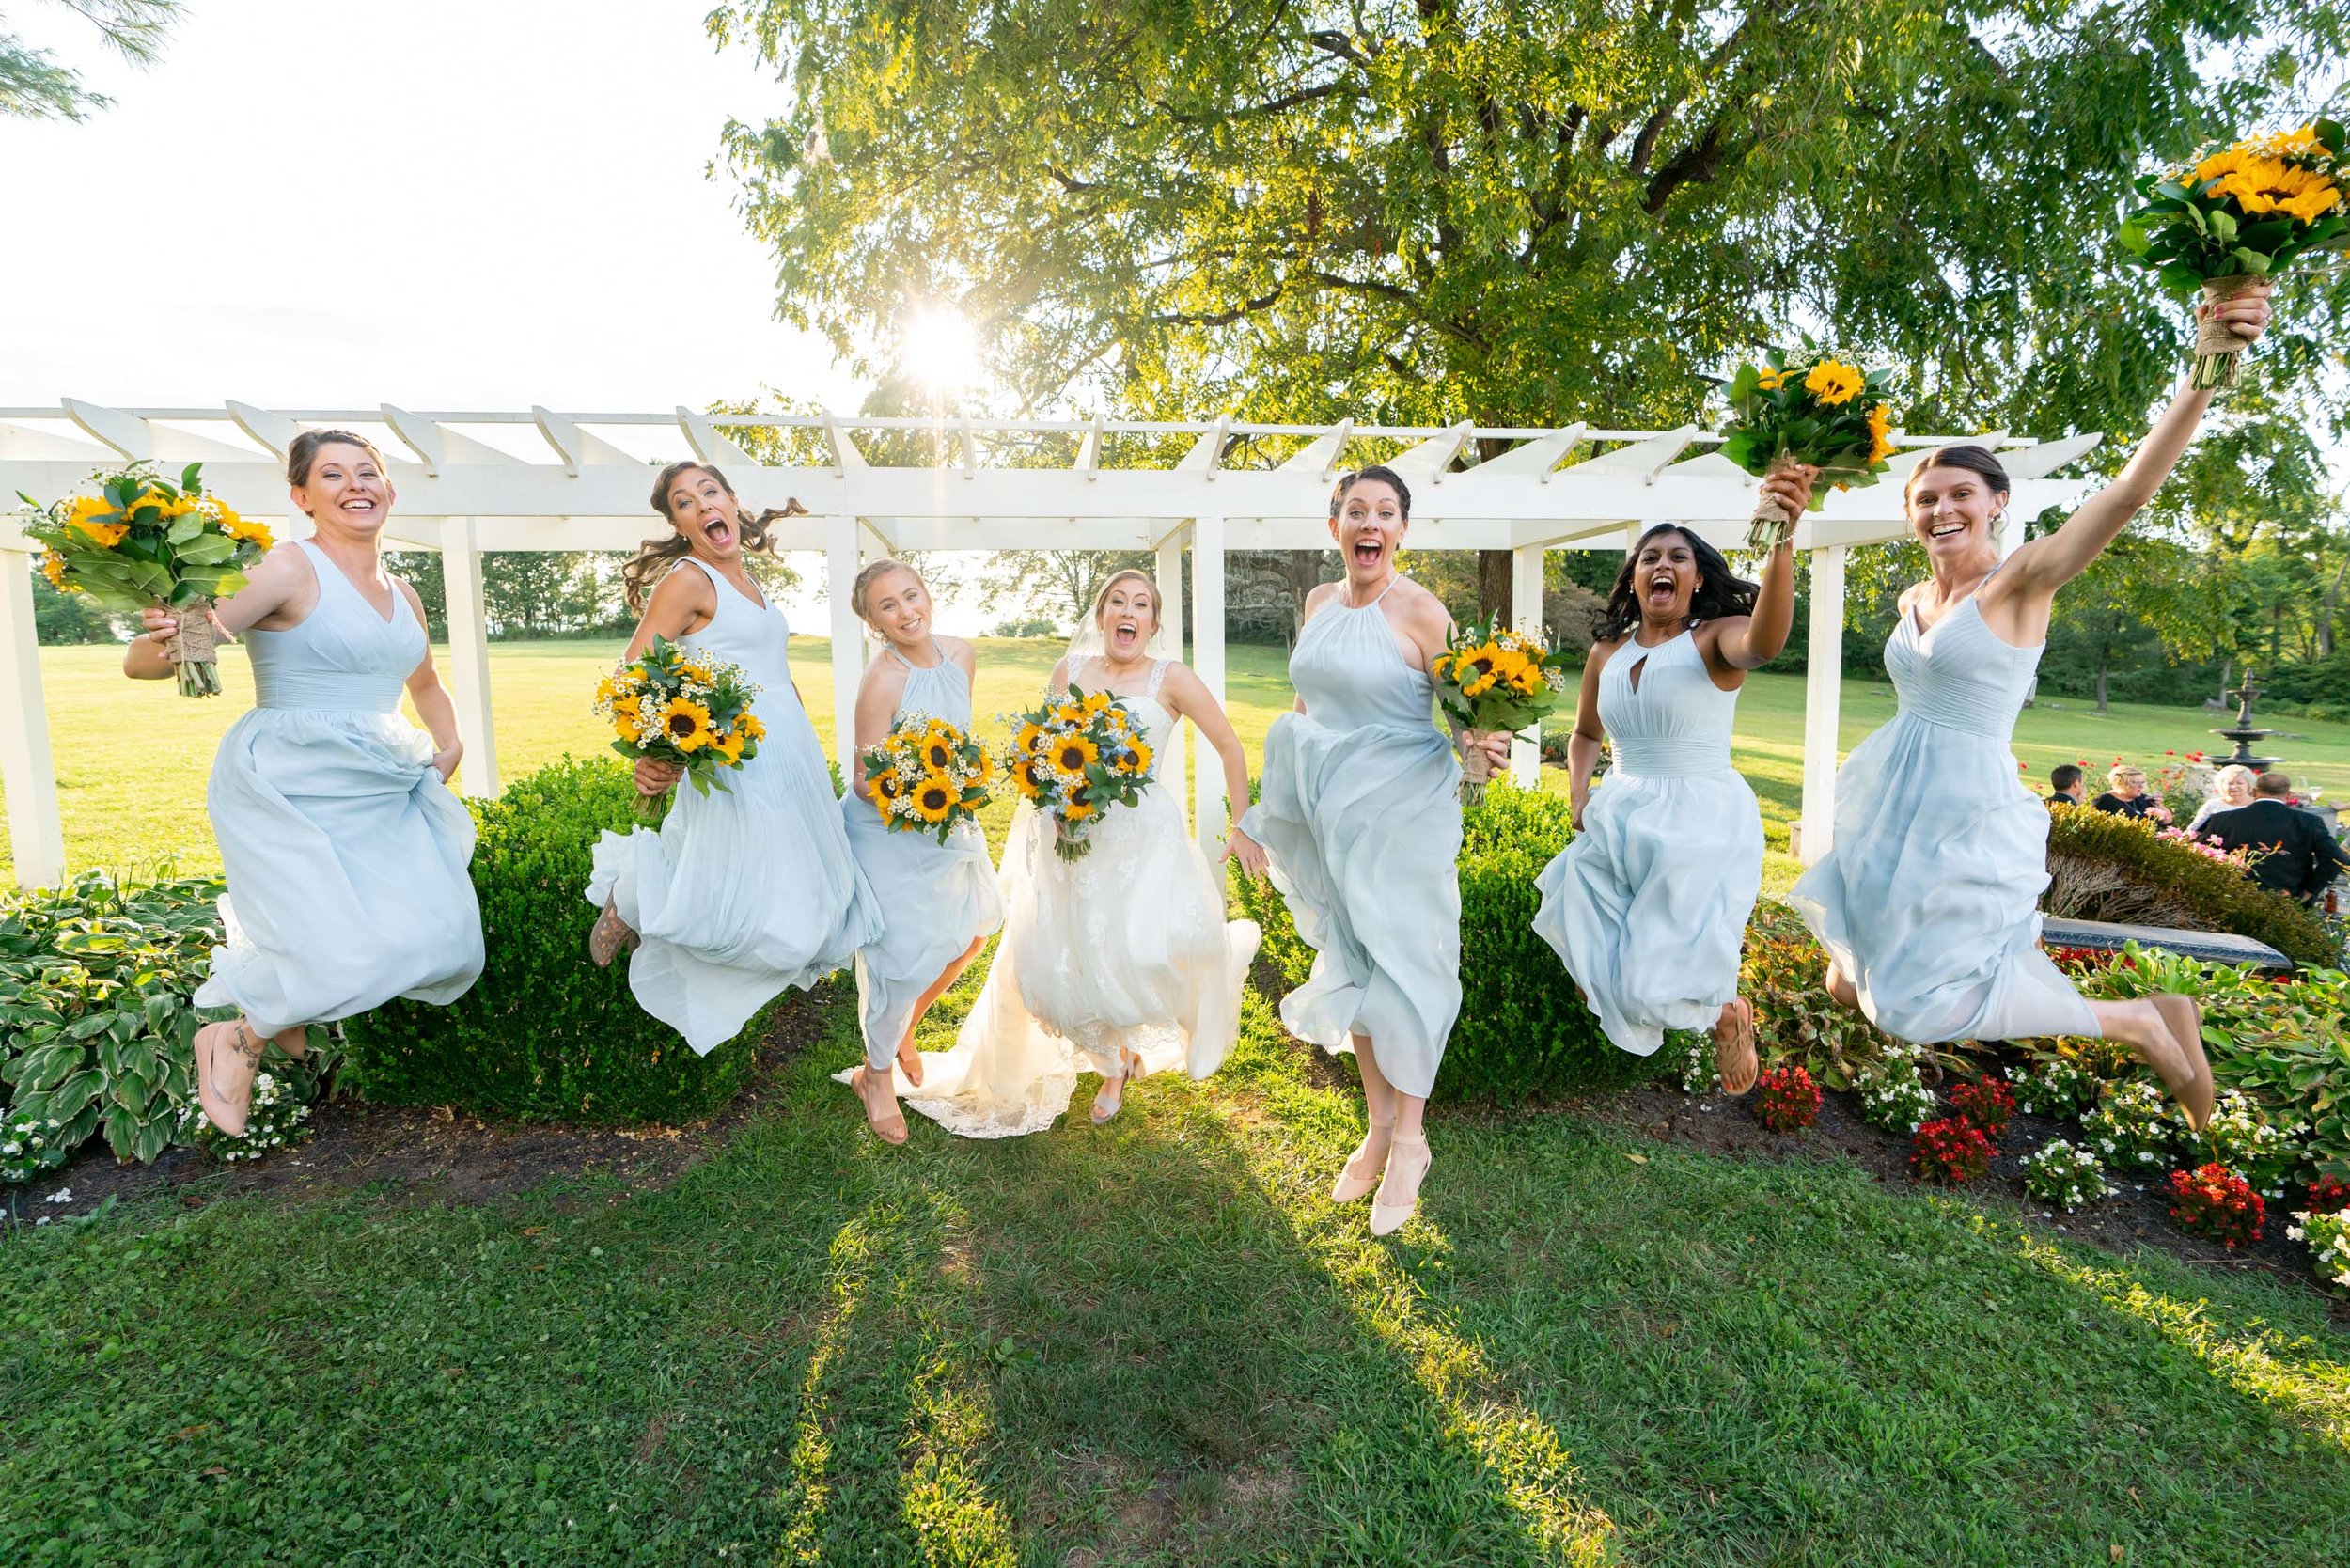 Bride and bridesmaids jumping in the air photo with blue azazie gowns